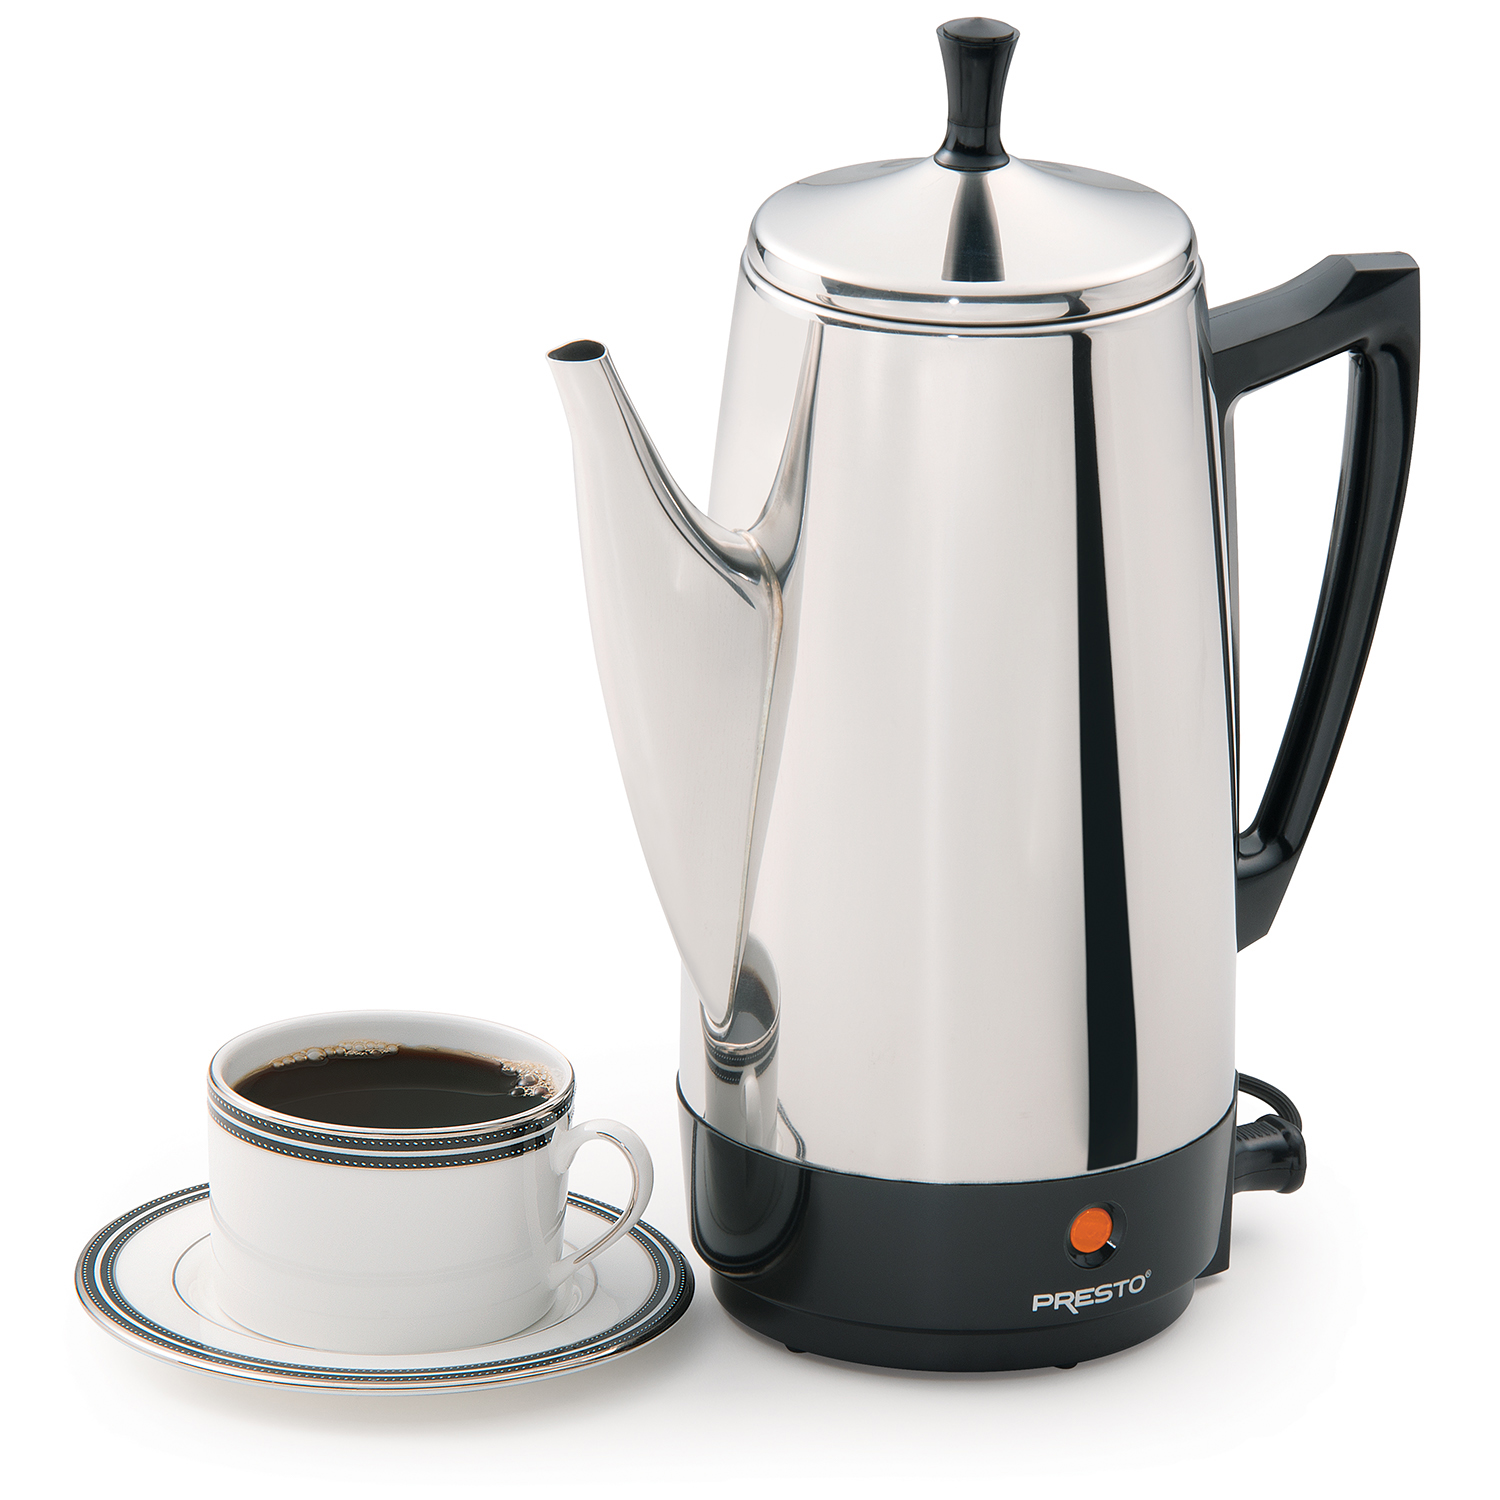 Presto 02811  12-Cup Coffee Maker - Stainless Steel